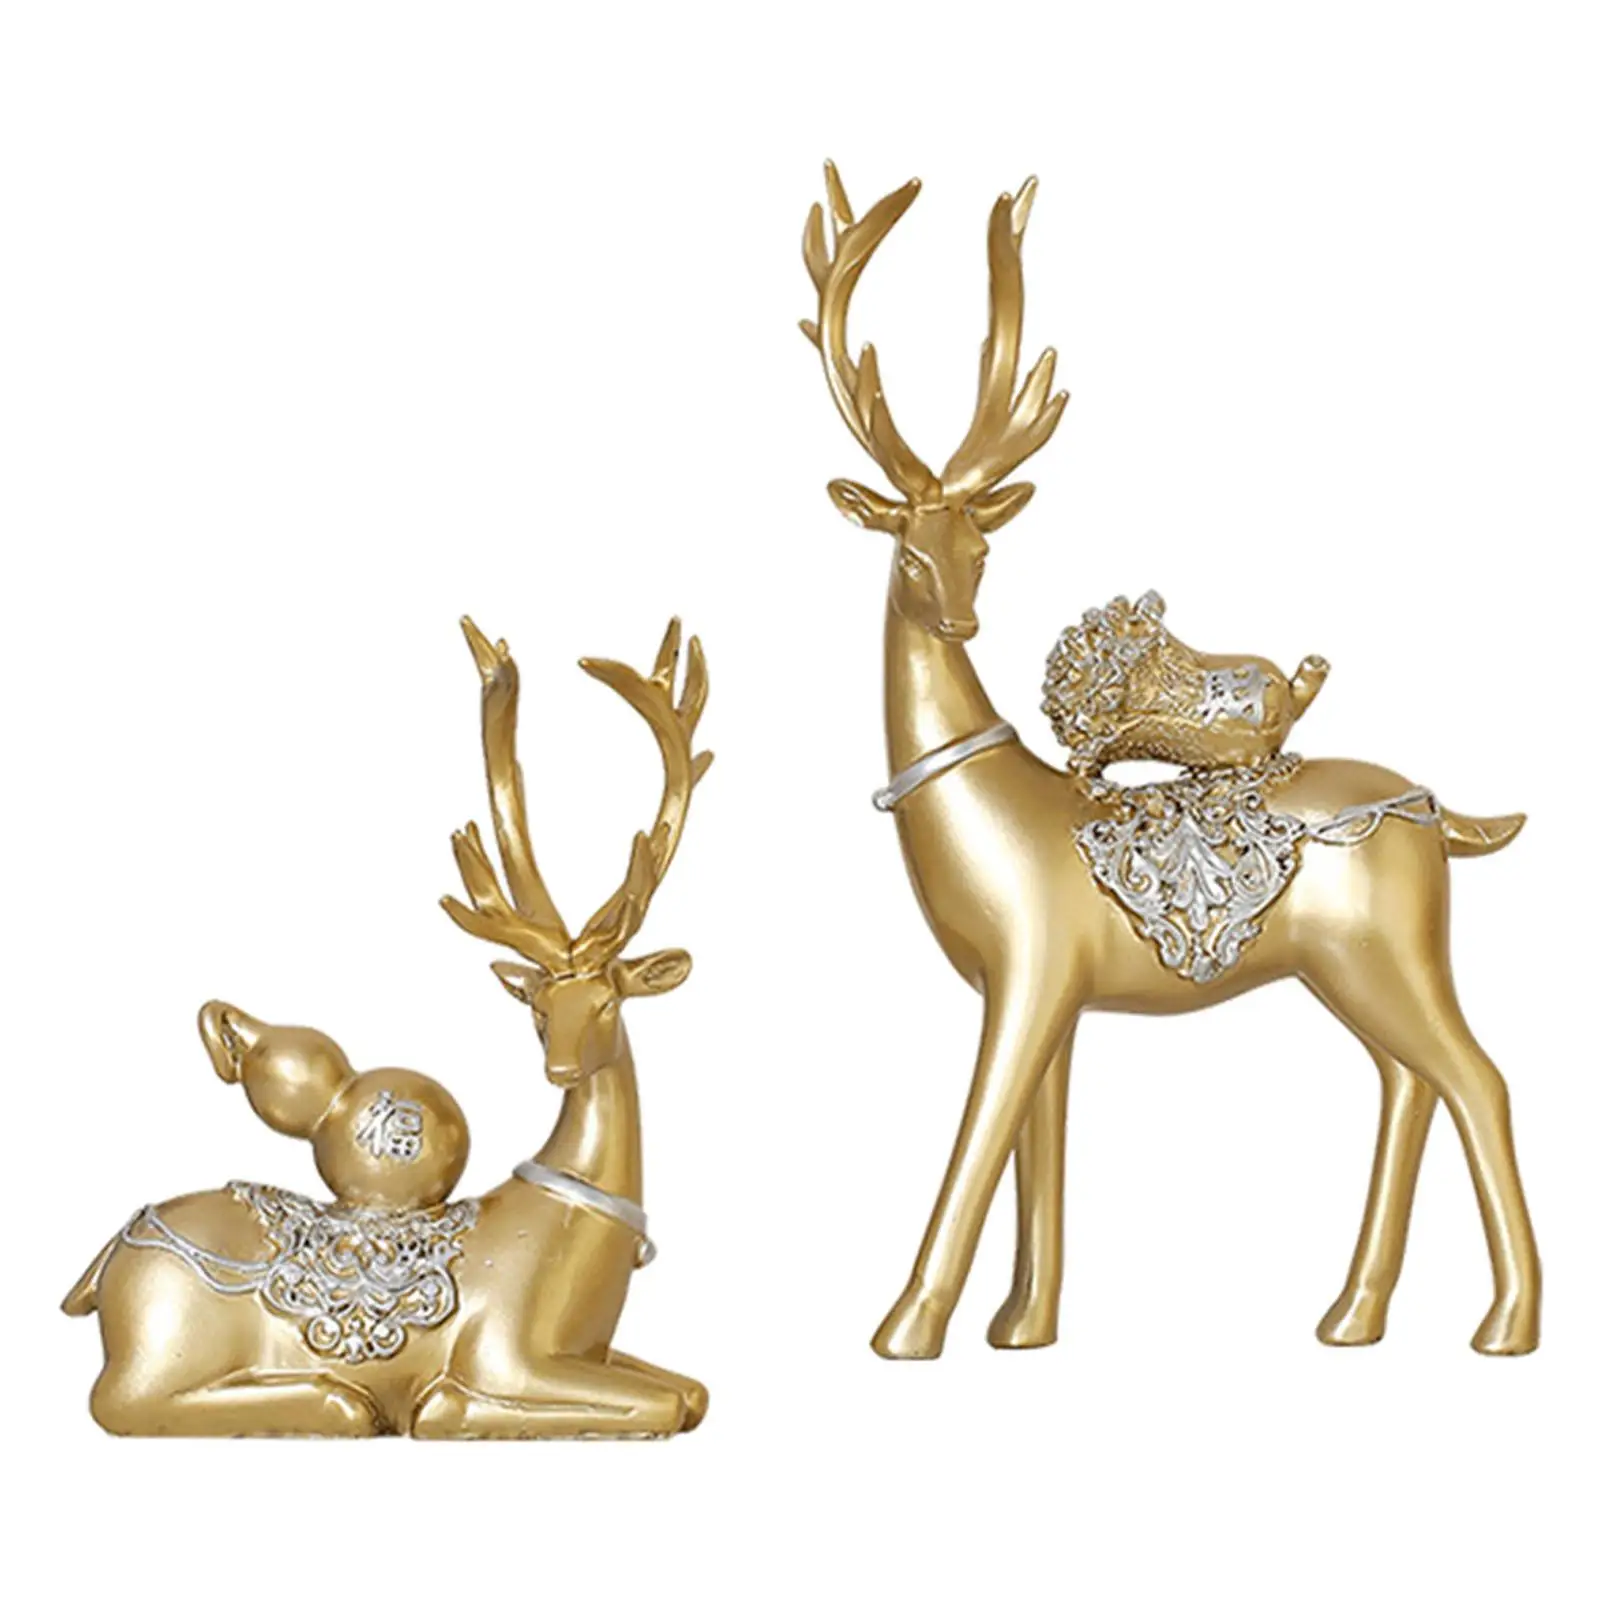 Reindeer Statue Table Collectable Craft Ornament for Bookshelf Decor Wedding